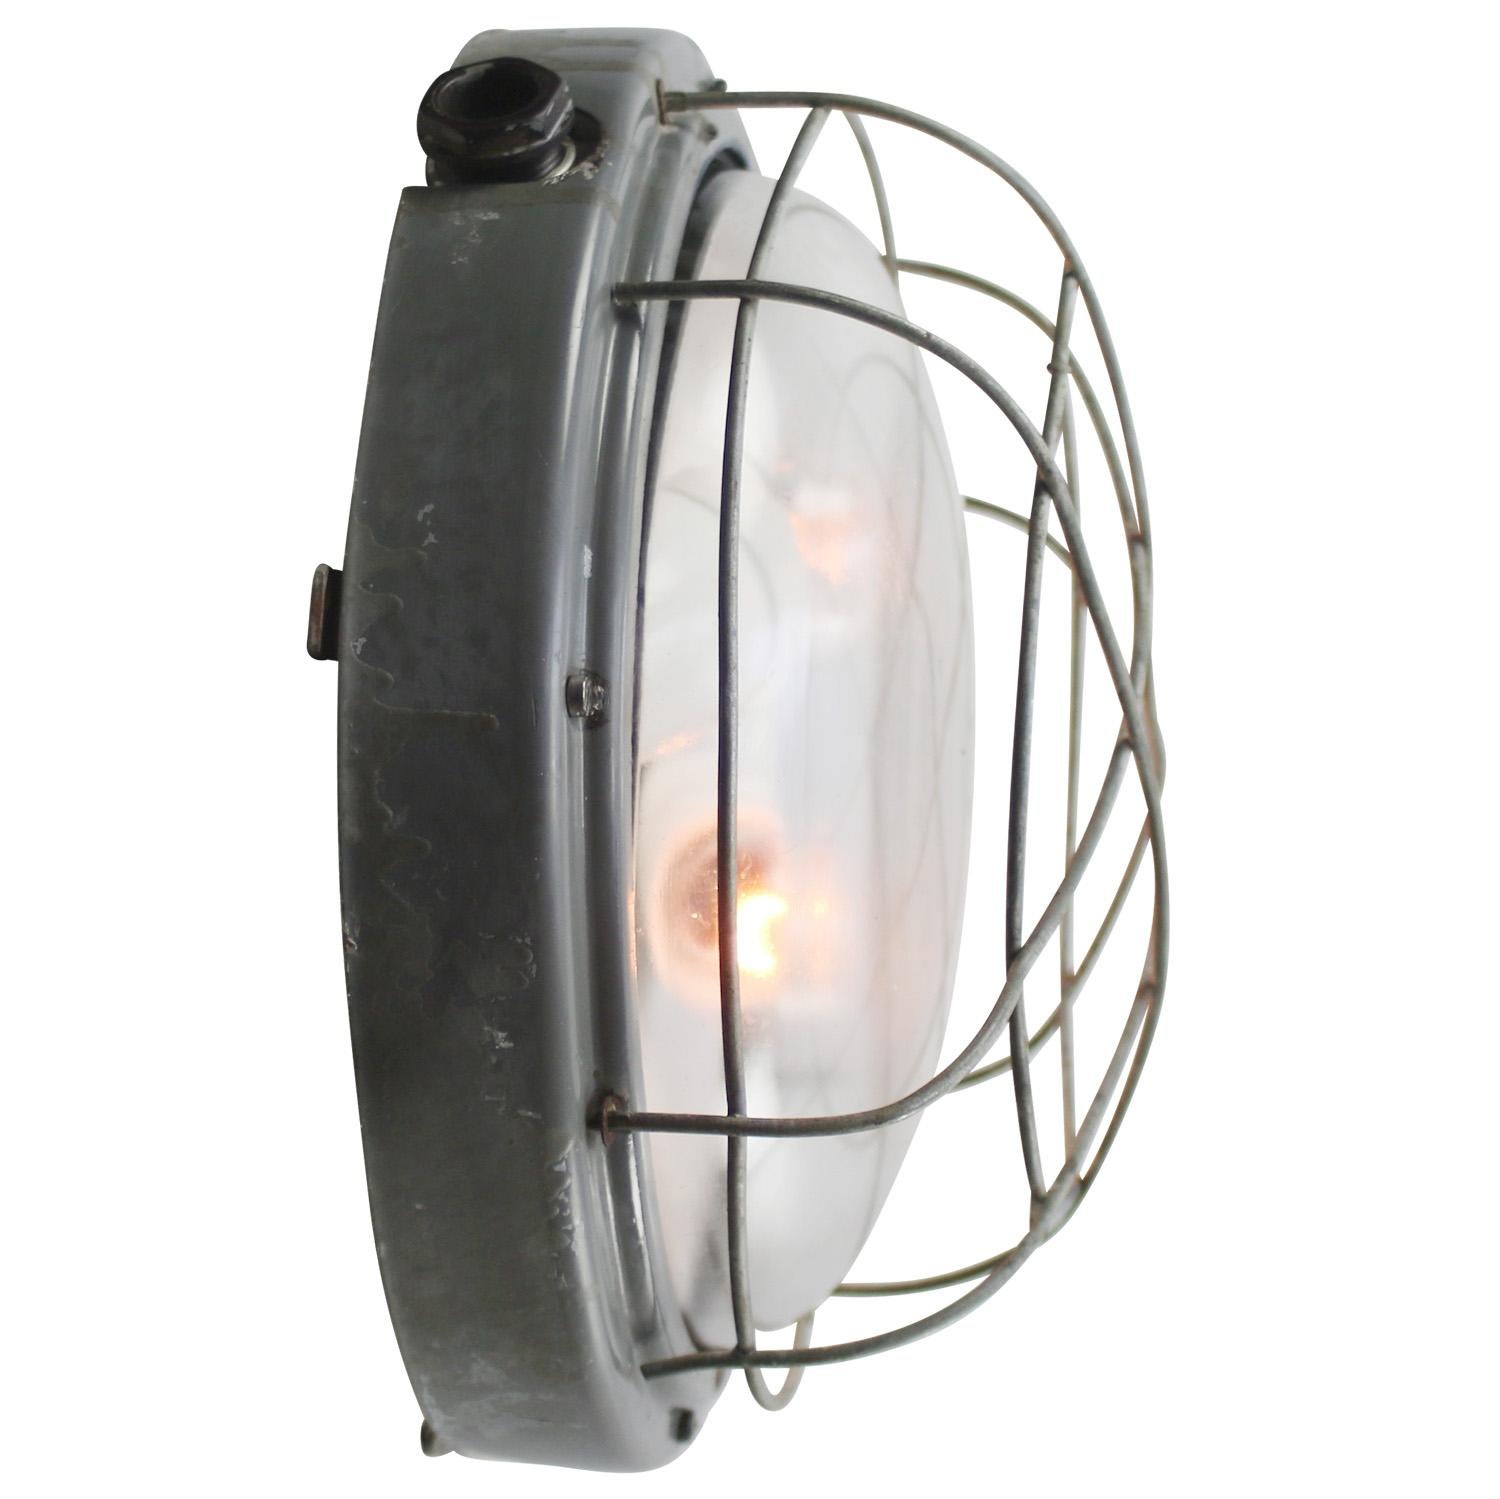 Industrial wall and ceiling scone. Grey aluminium.
Clear glass. Double bulb holder.

Weight: 2.00 kg / 4.4 lb

Priced per individual item. All lamps have been made suitable by international standards for incandescent light bulbs, energy-efficient